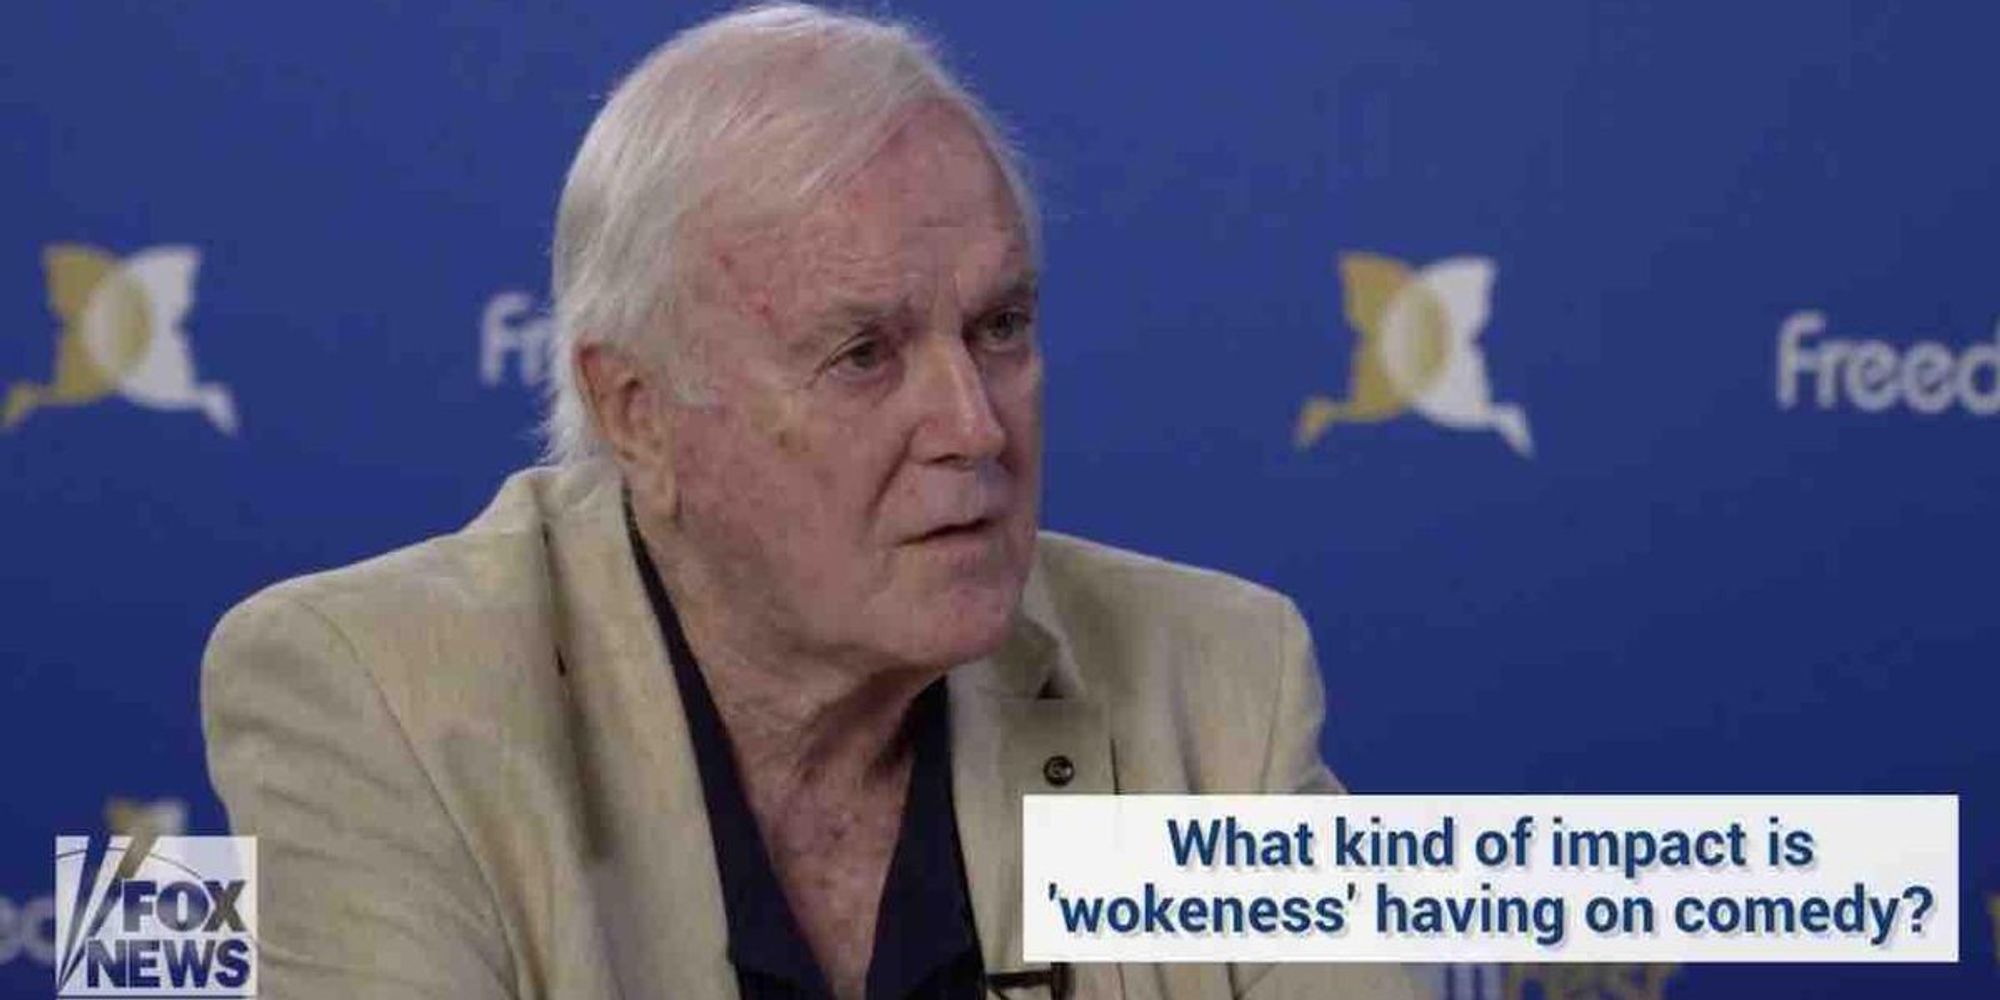 John Cleese says 'woke attitudes' are having 'disastrous effect' on comedy; fearful writers are censoring themselves: 'The death of creativity'